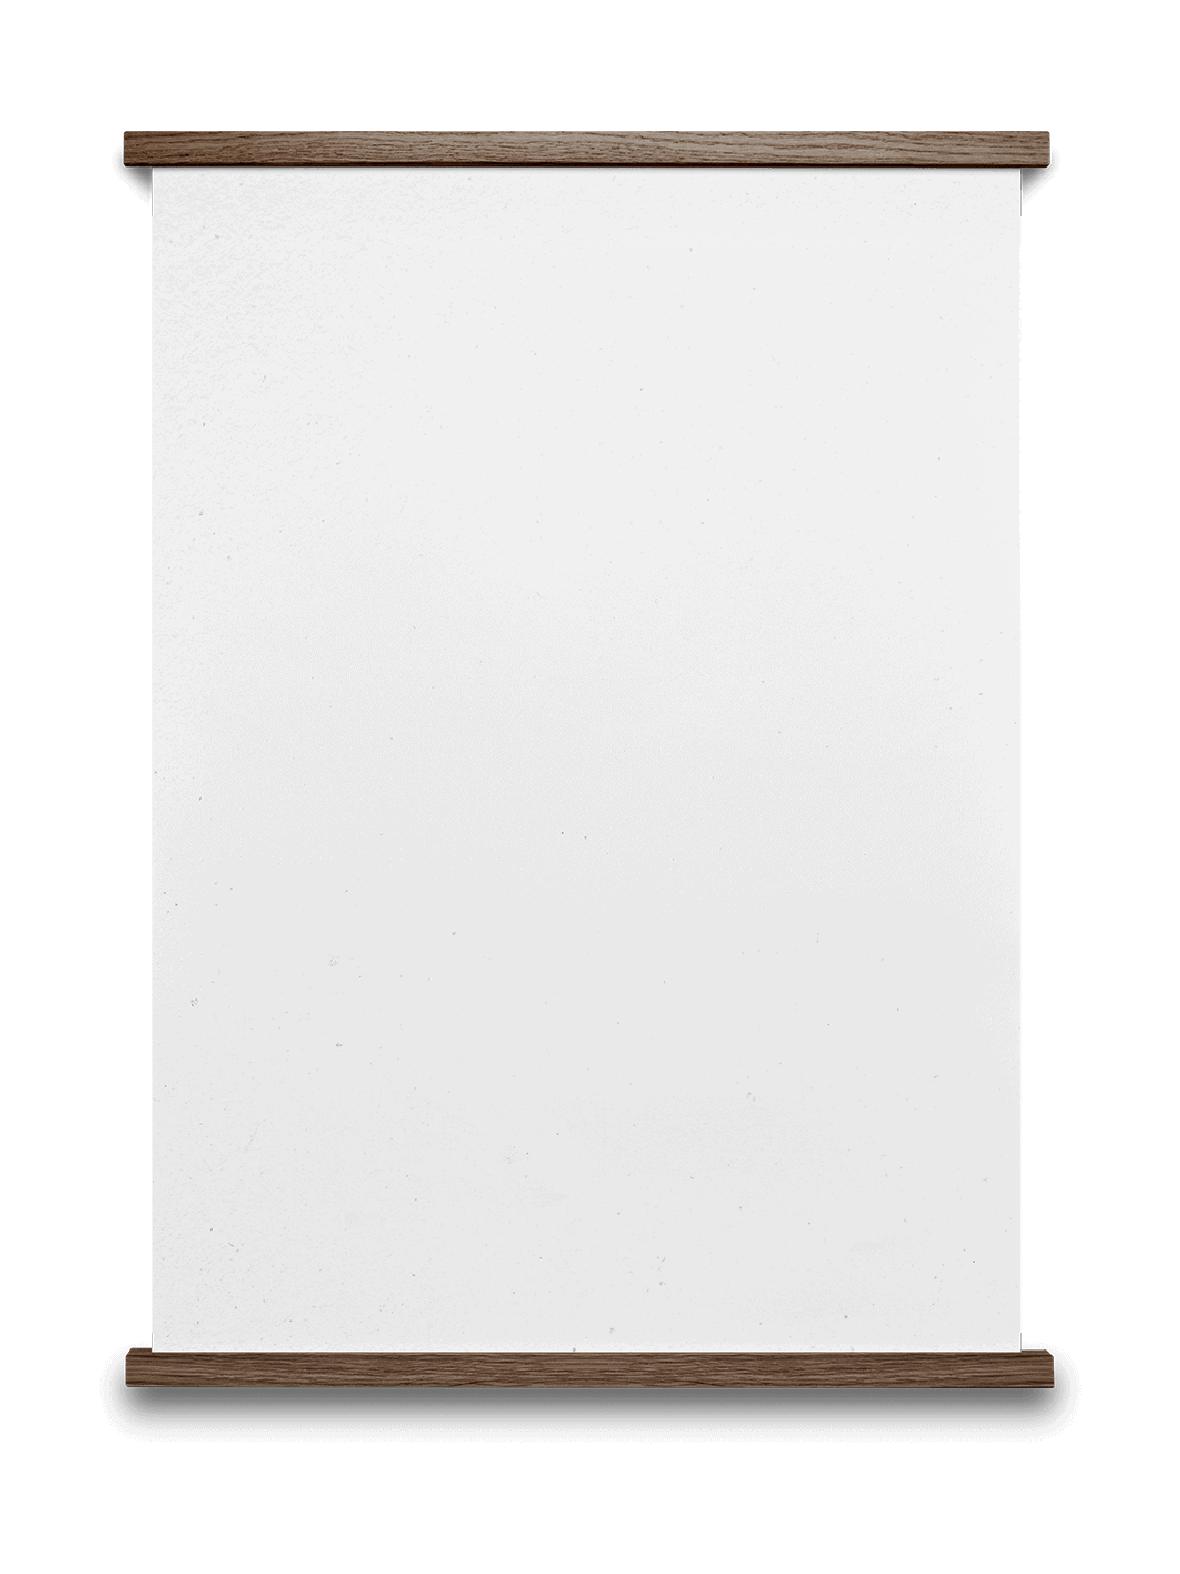 Paper Collective S Tii Cks 53 Magnetic Poster Bar, Walnut